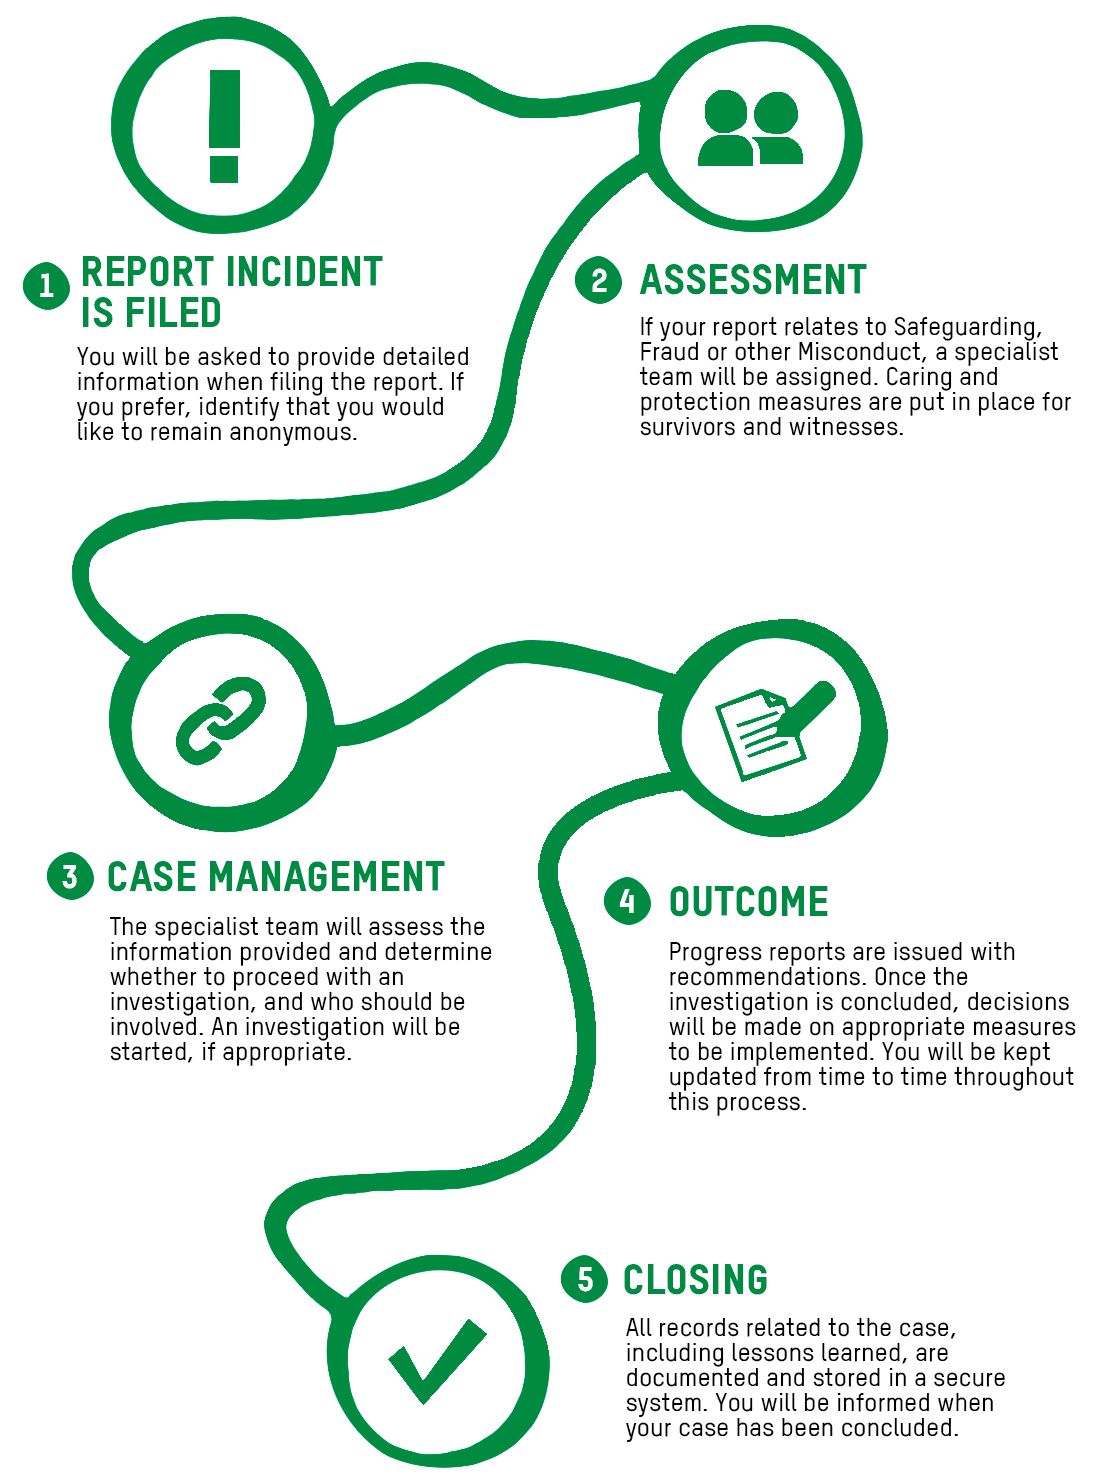 This graphic outlines the steps of the misconduct reporting process, including filing an incident report, the assessment, case management, the outcome and the closing of the case